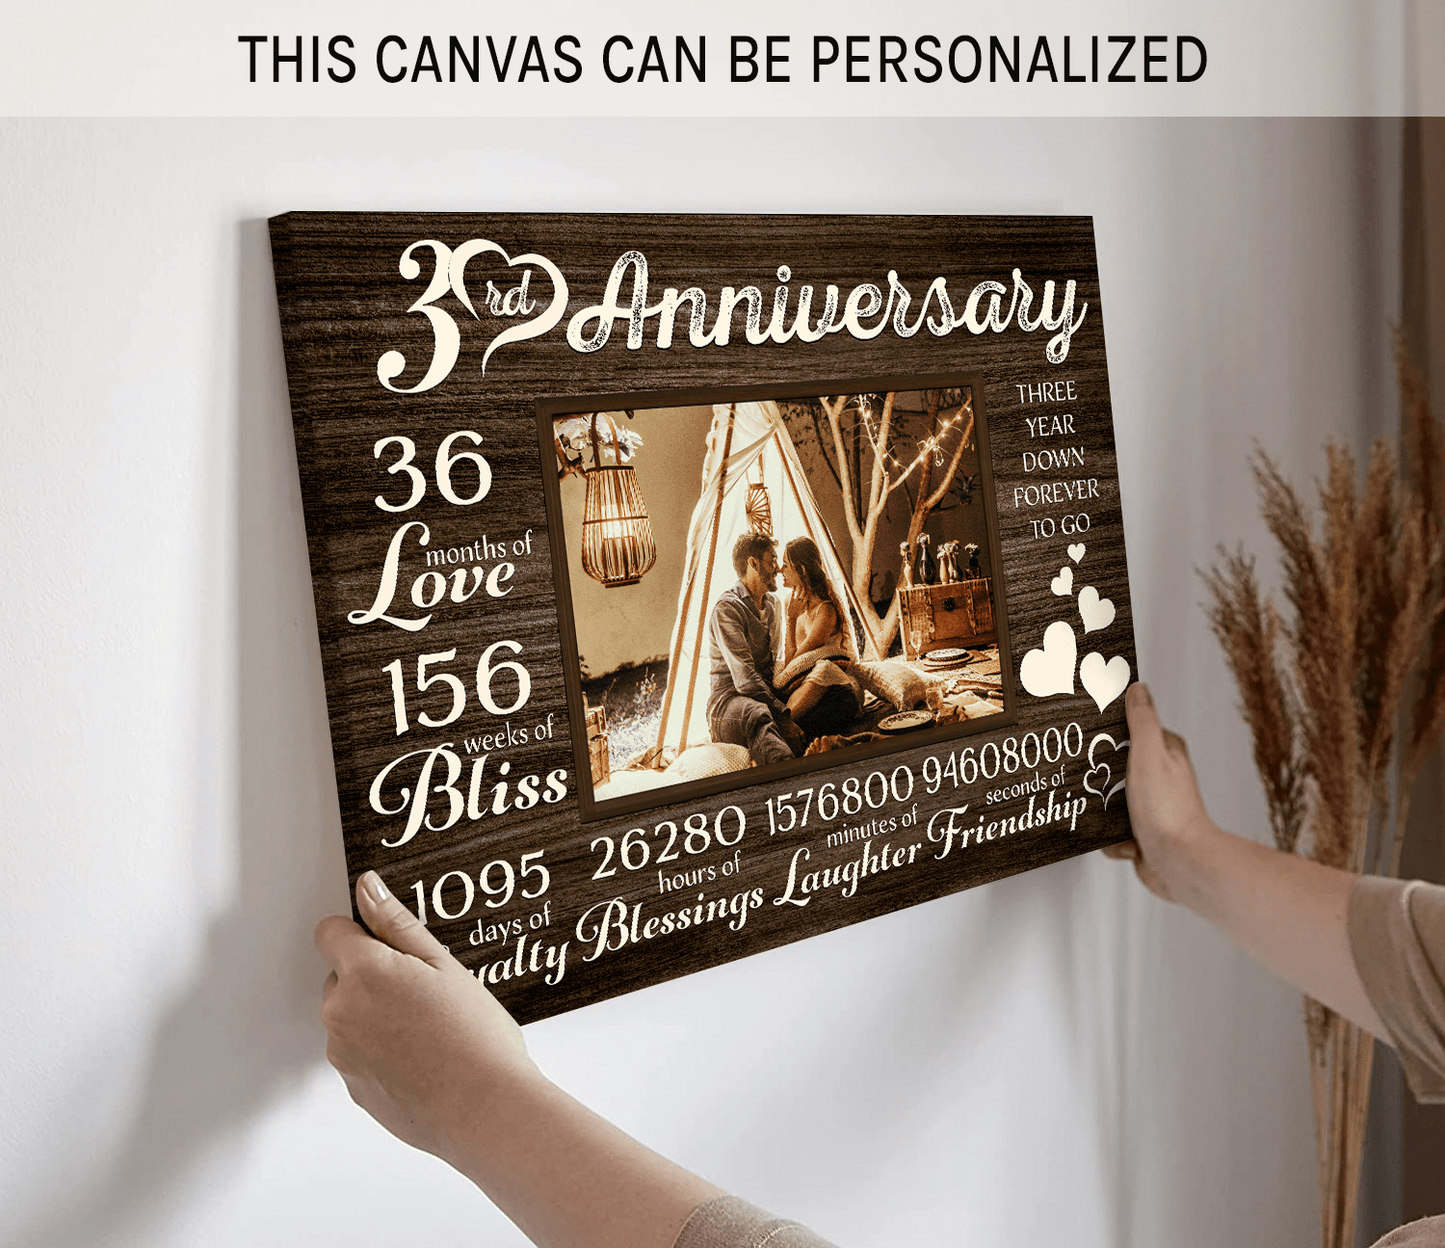 Personalized 3 year anniversary gift for him for her - 36 months of love - custom Couple Canvas print - MyMindfulGifts